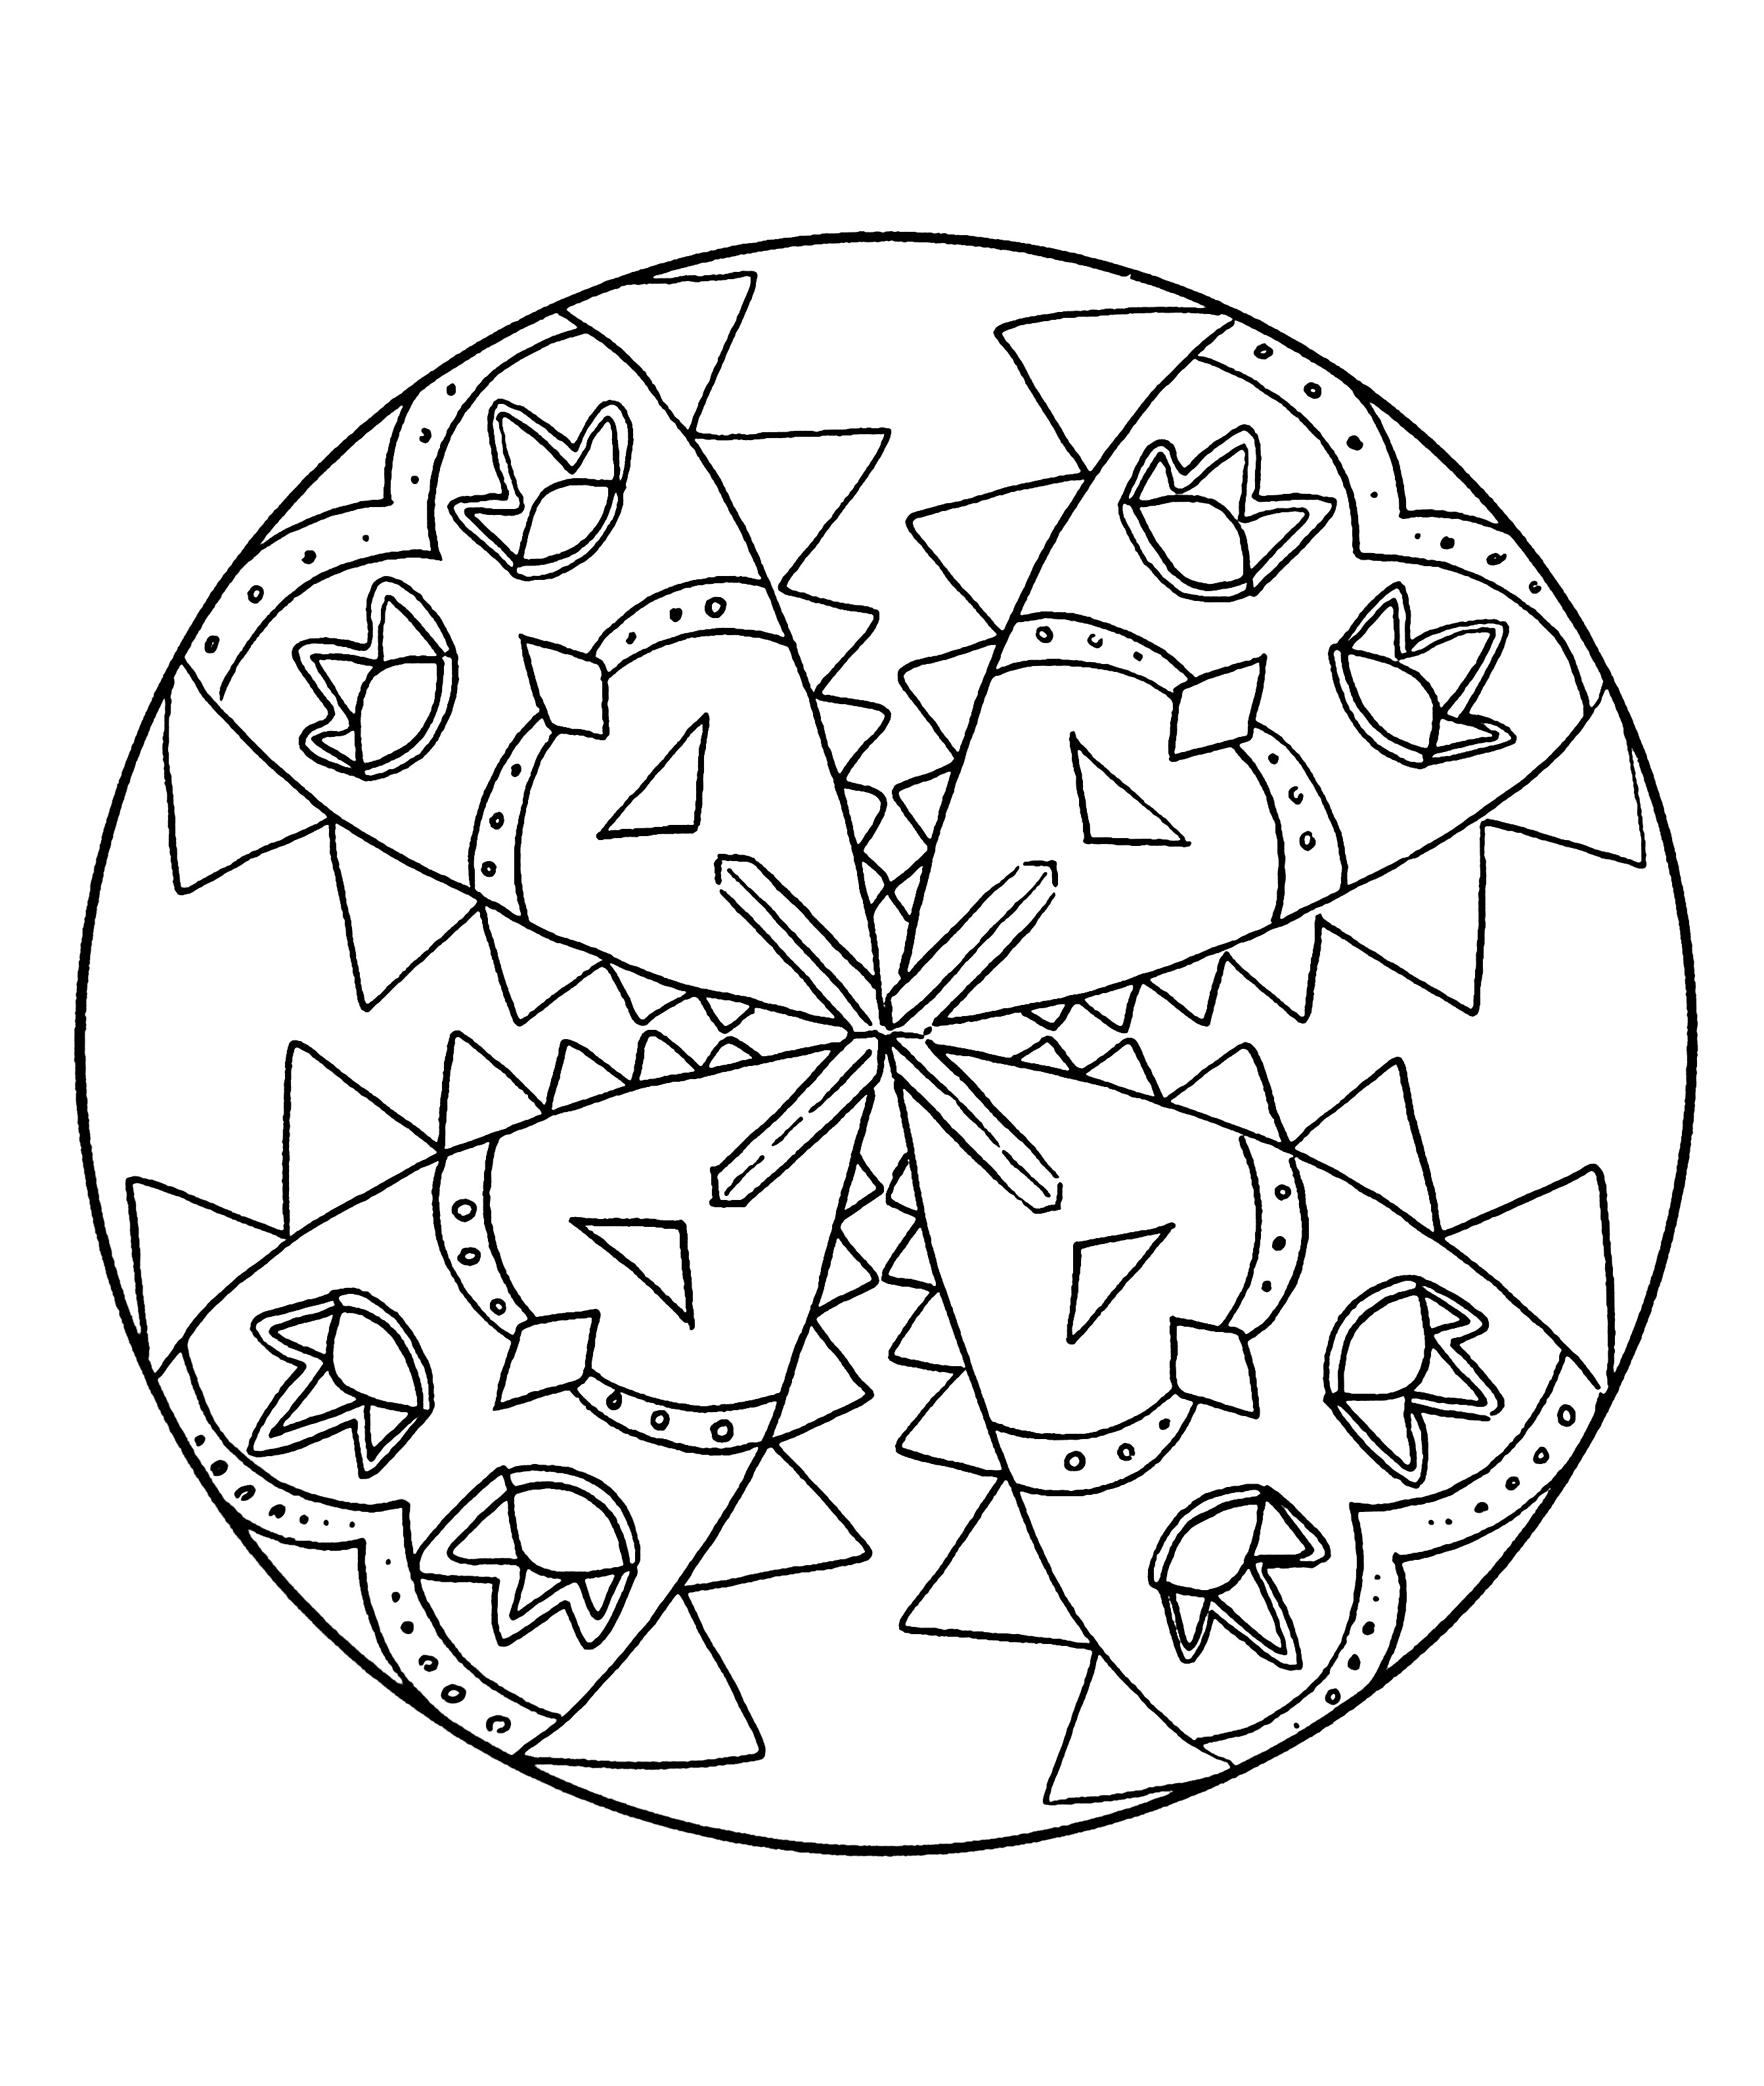 A Mandala coloring page easy to color, perfect for the children, with large areas to color. Do whatever it takes to get rid of any distractions that may interfere with your coloring.